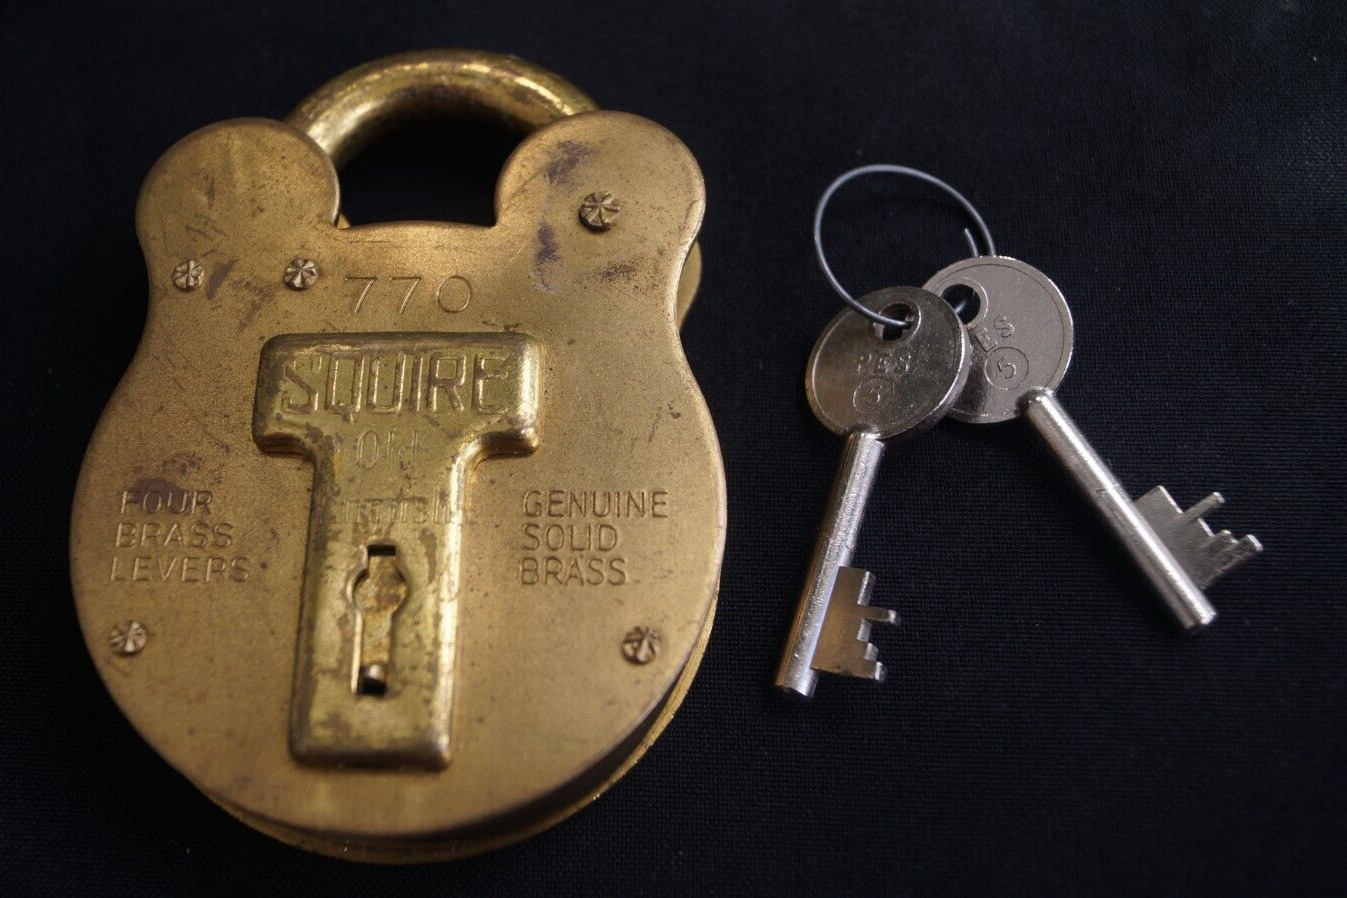 Vintage Made England Squire & Sons #770 Solid Brass Working Lock & Keys